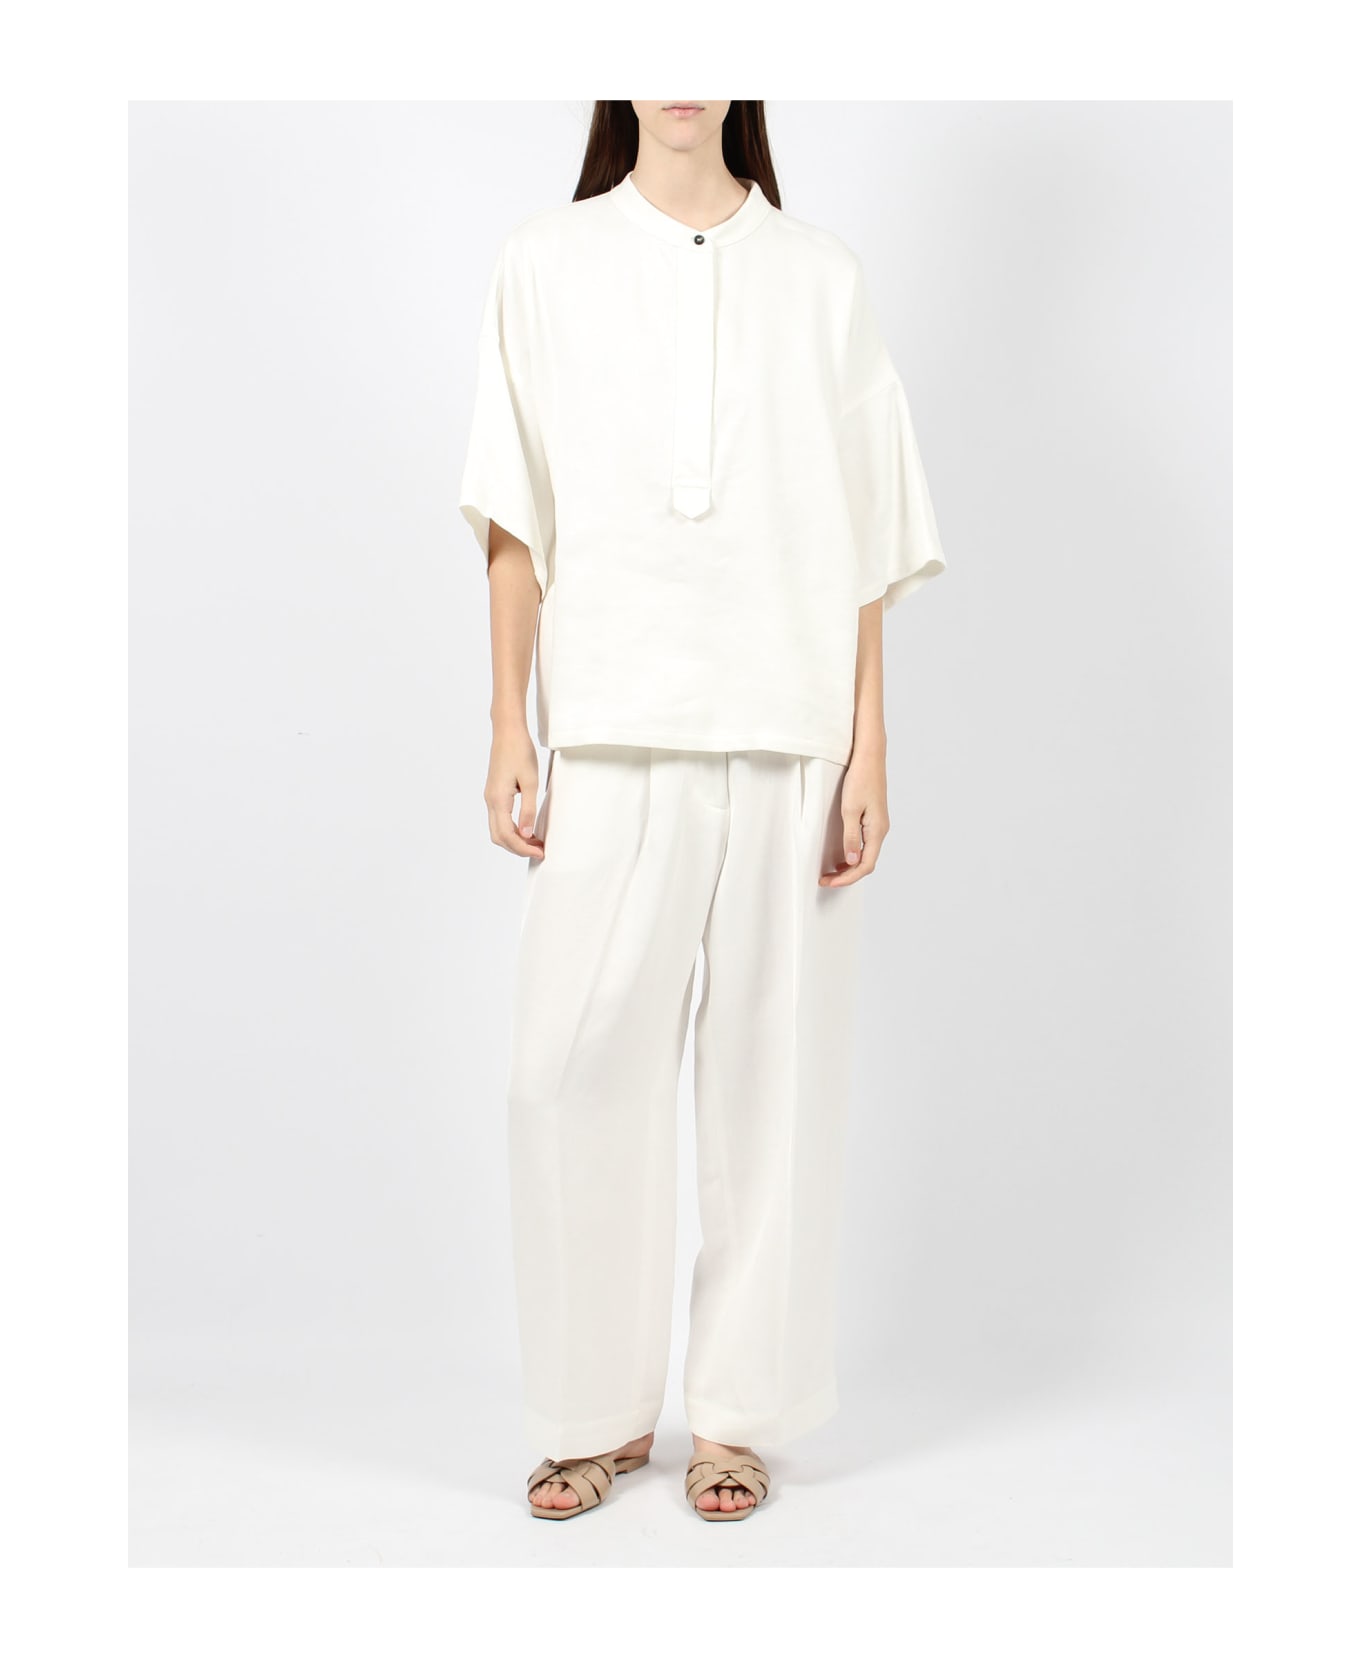 Nine in the Morning Rubino Culotte Pence Trousers - White ボトムス